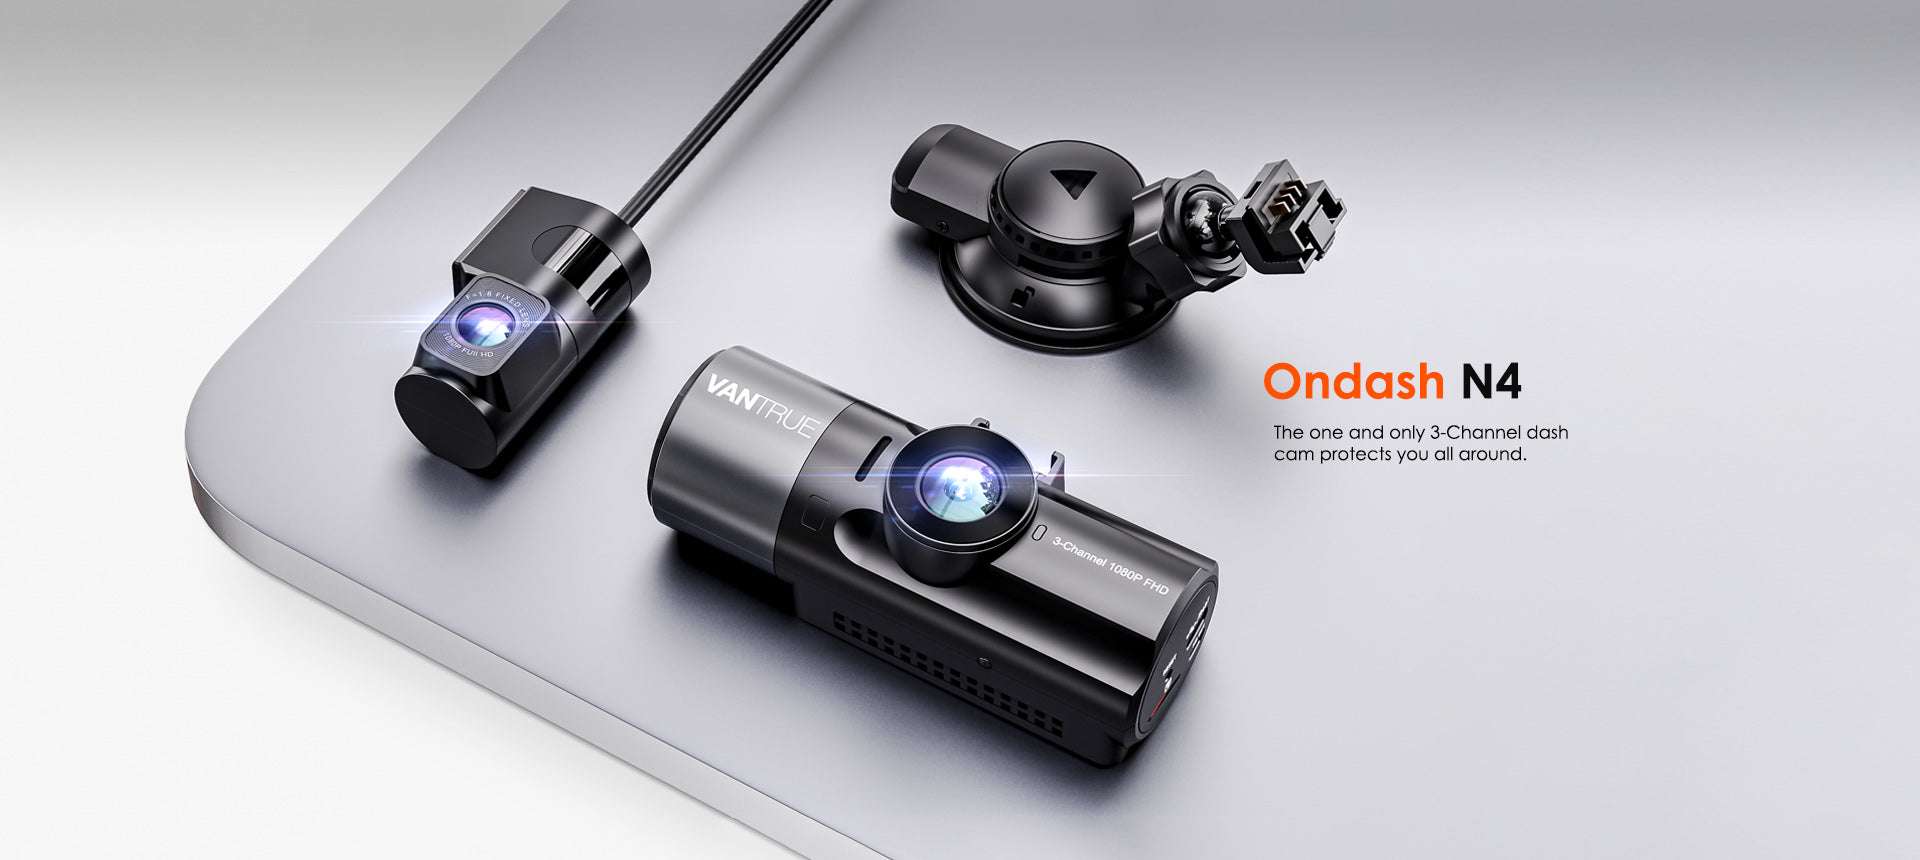 Vantrue launches N5: An All-in-one Dash Cam that comes with